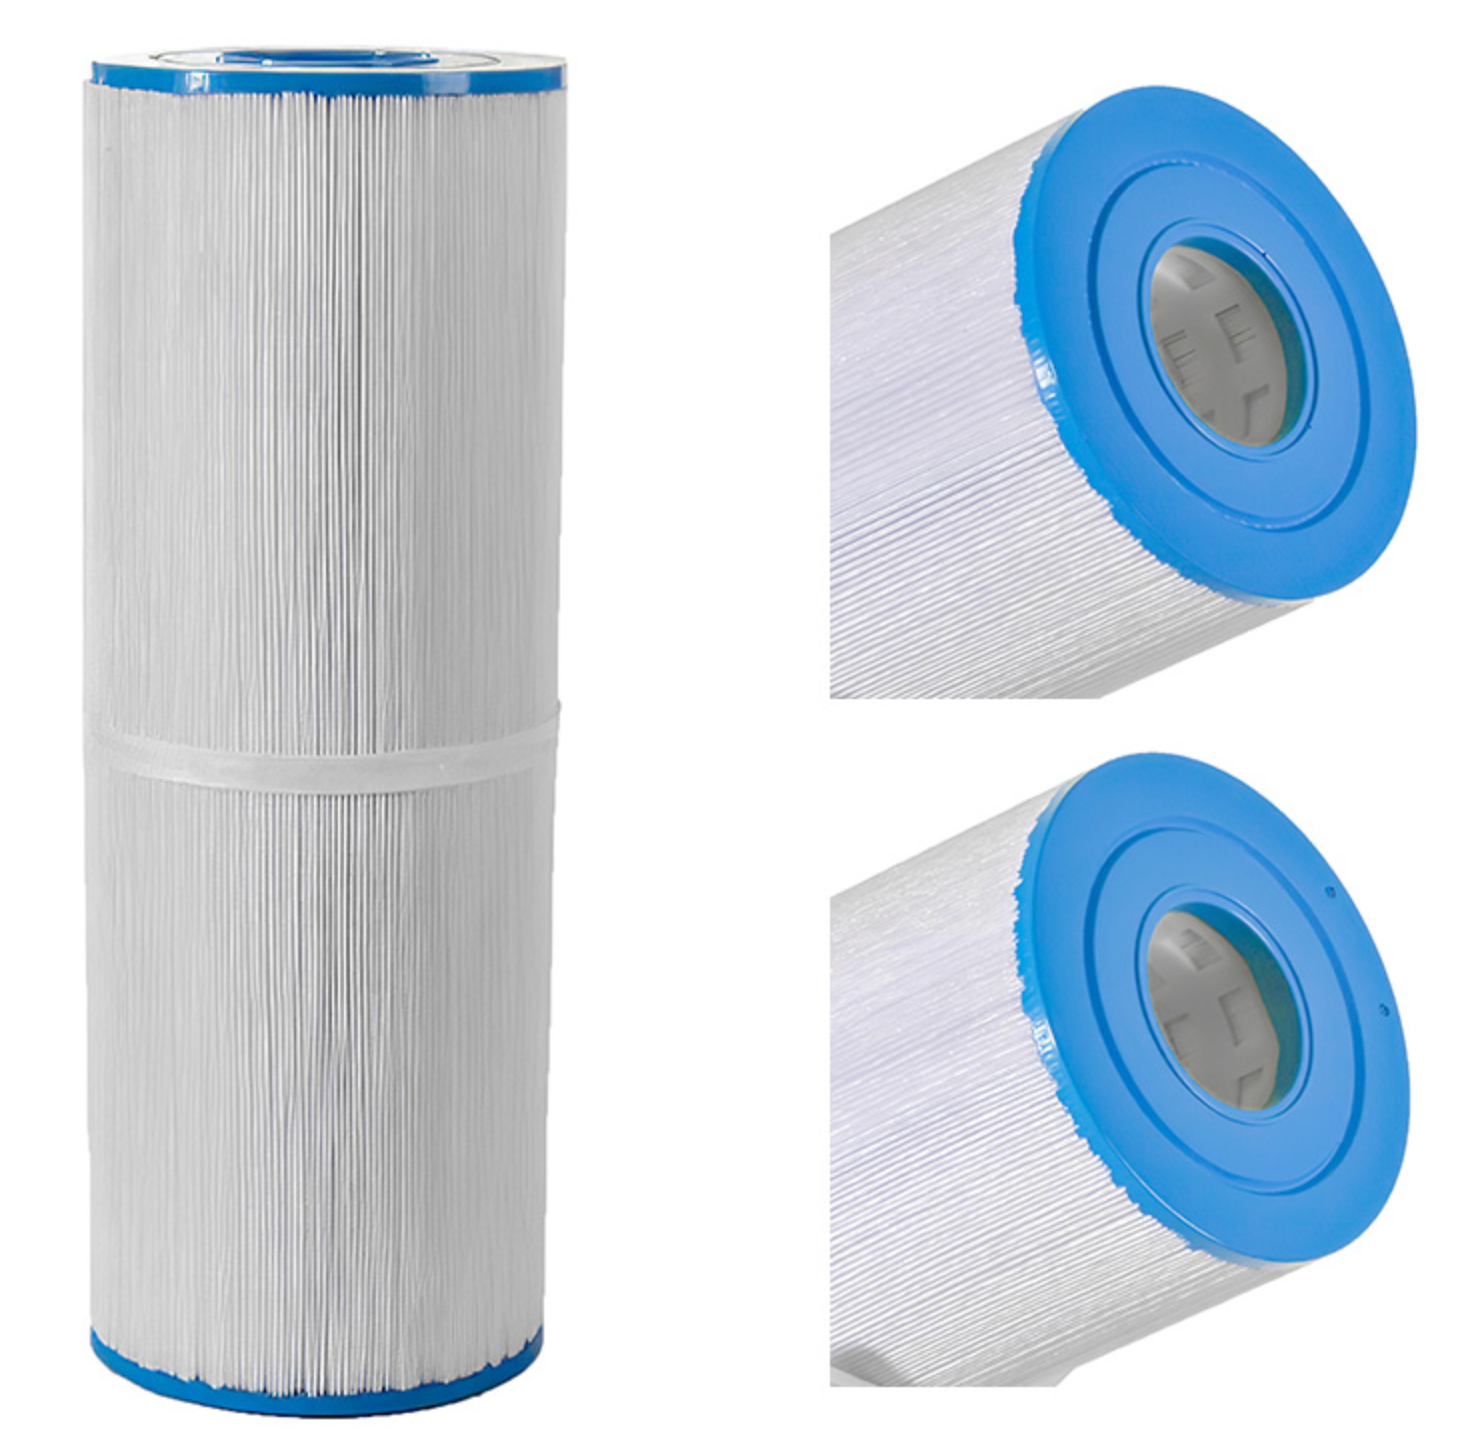 Darlly 50651 Filter Cartridge Replaces PLBS75, FC-2971, and C-5374